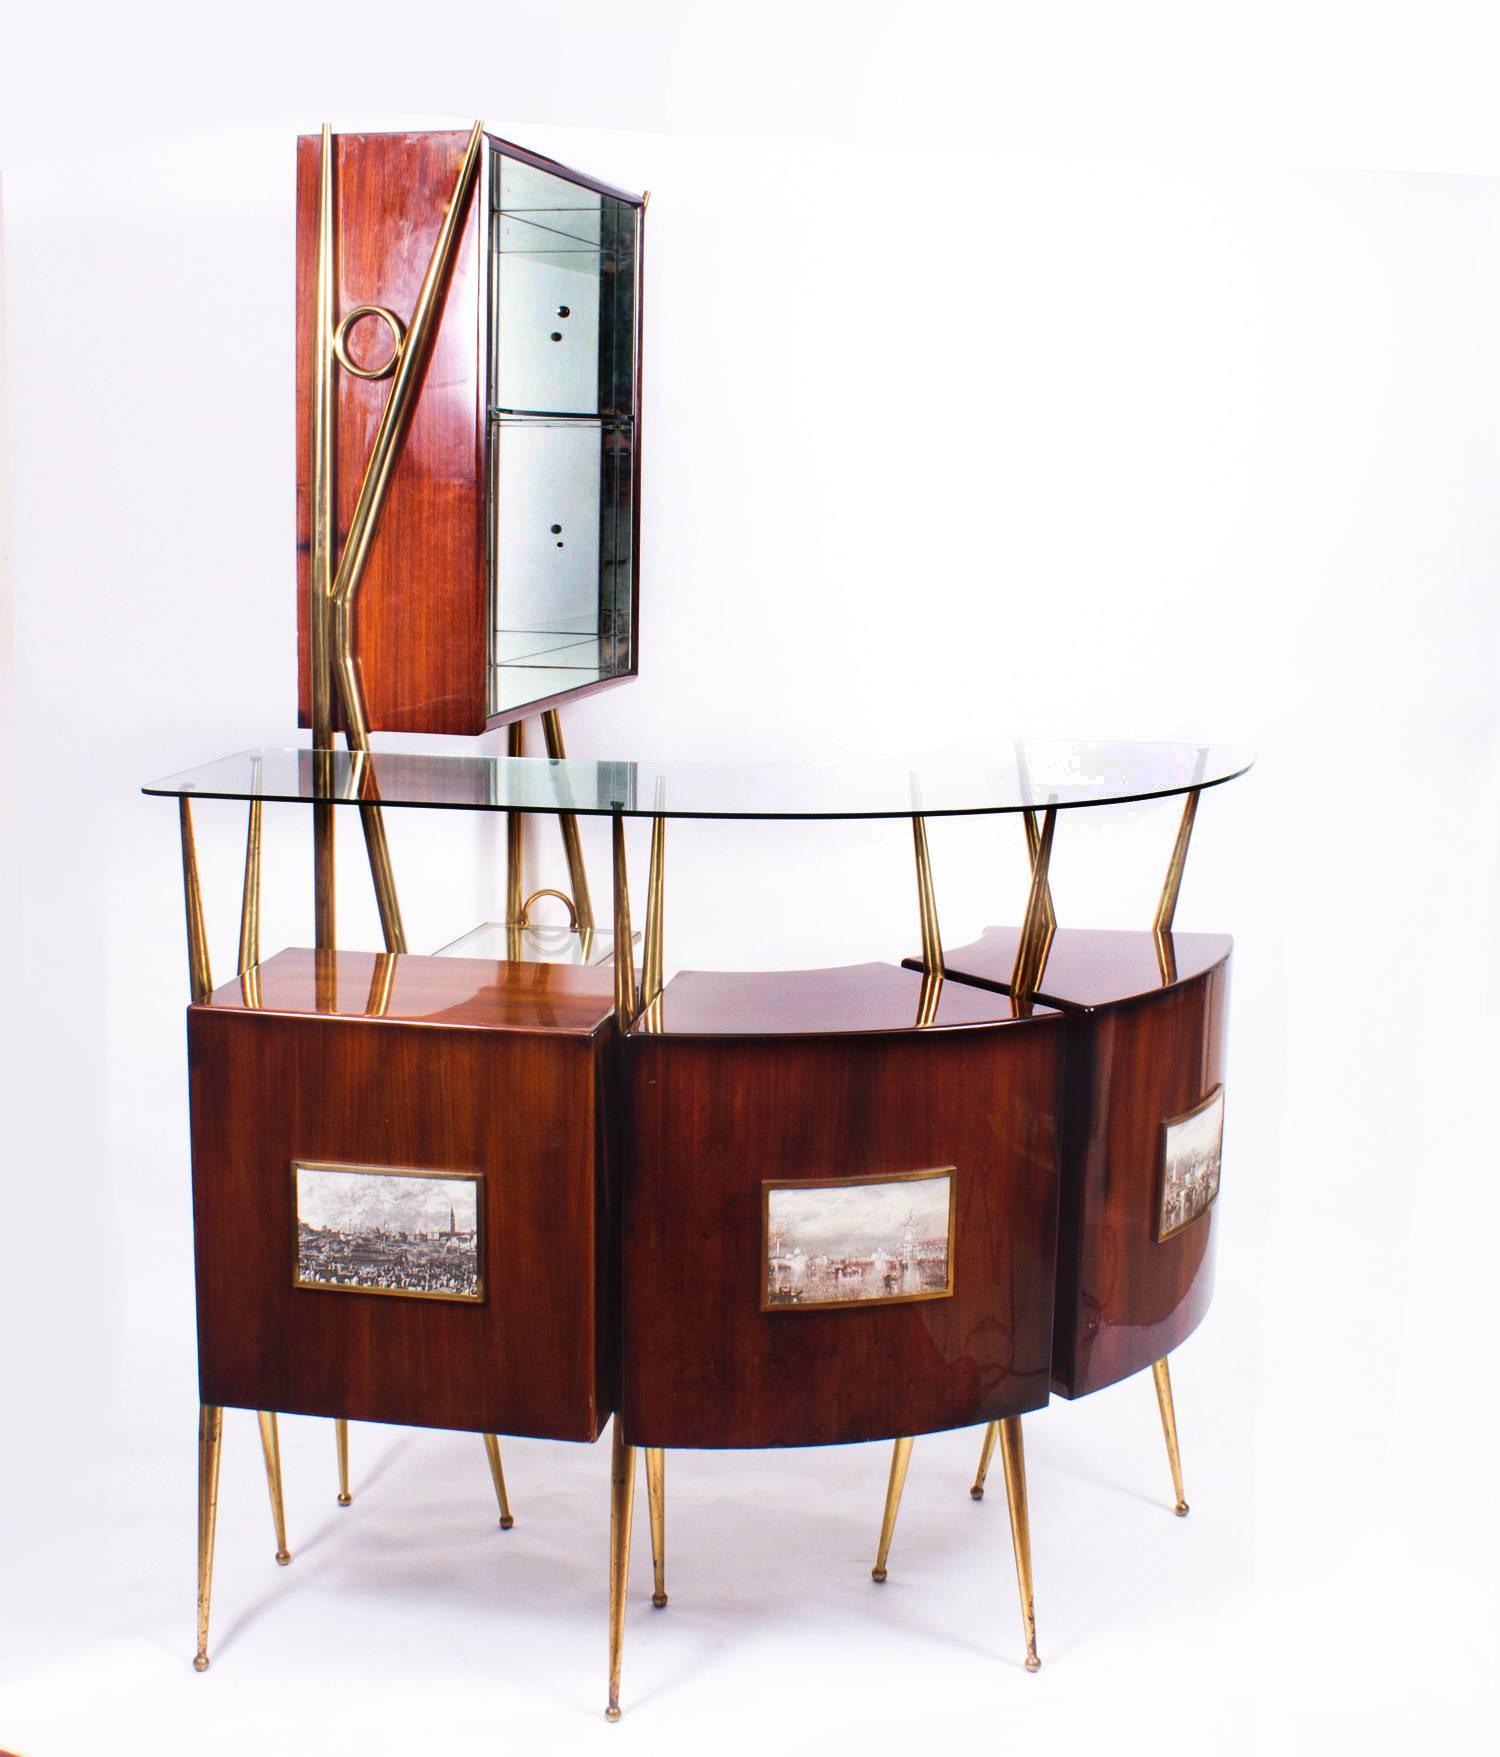 Antique Cocktail Bar and Mirrored Cabinet, manner of Gio Ponti C1950 3